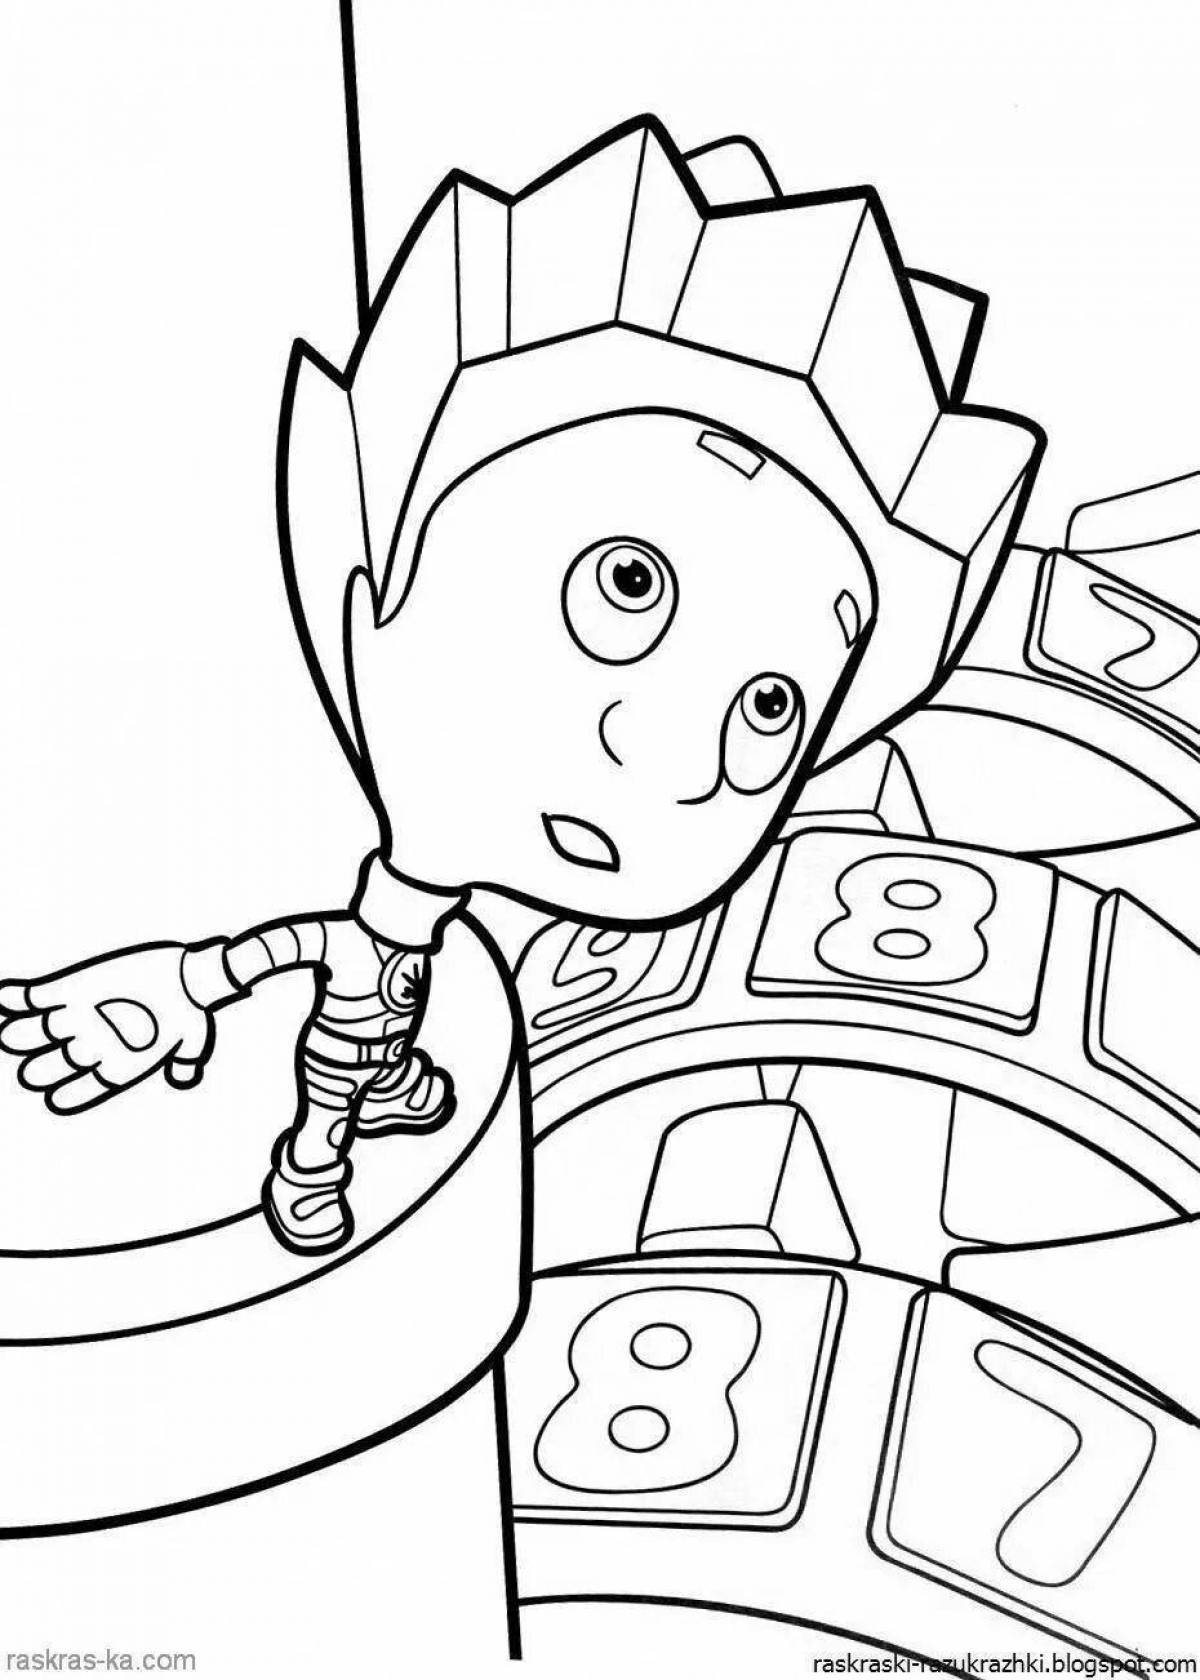 Adorable Fixies Coloring Page for Toddlers